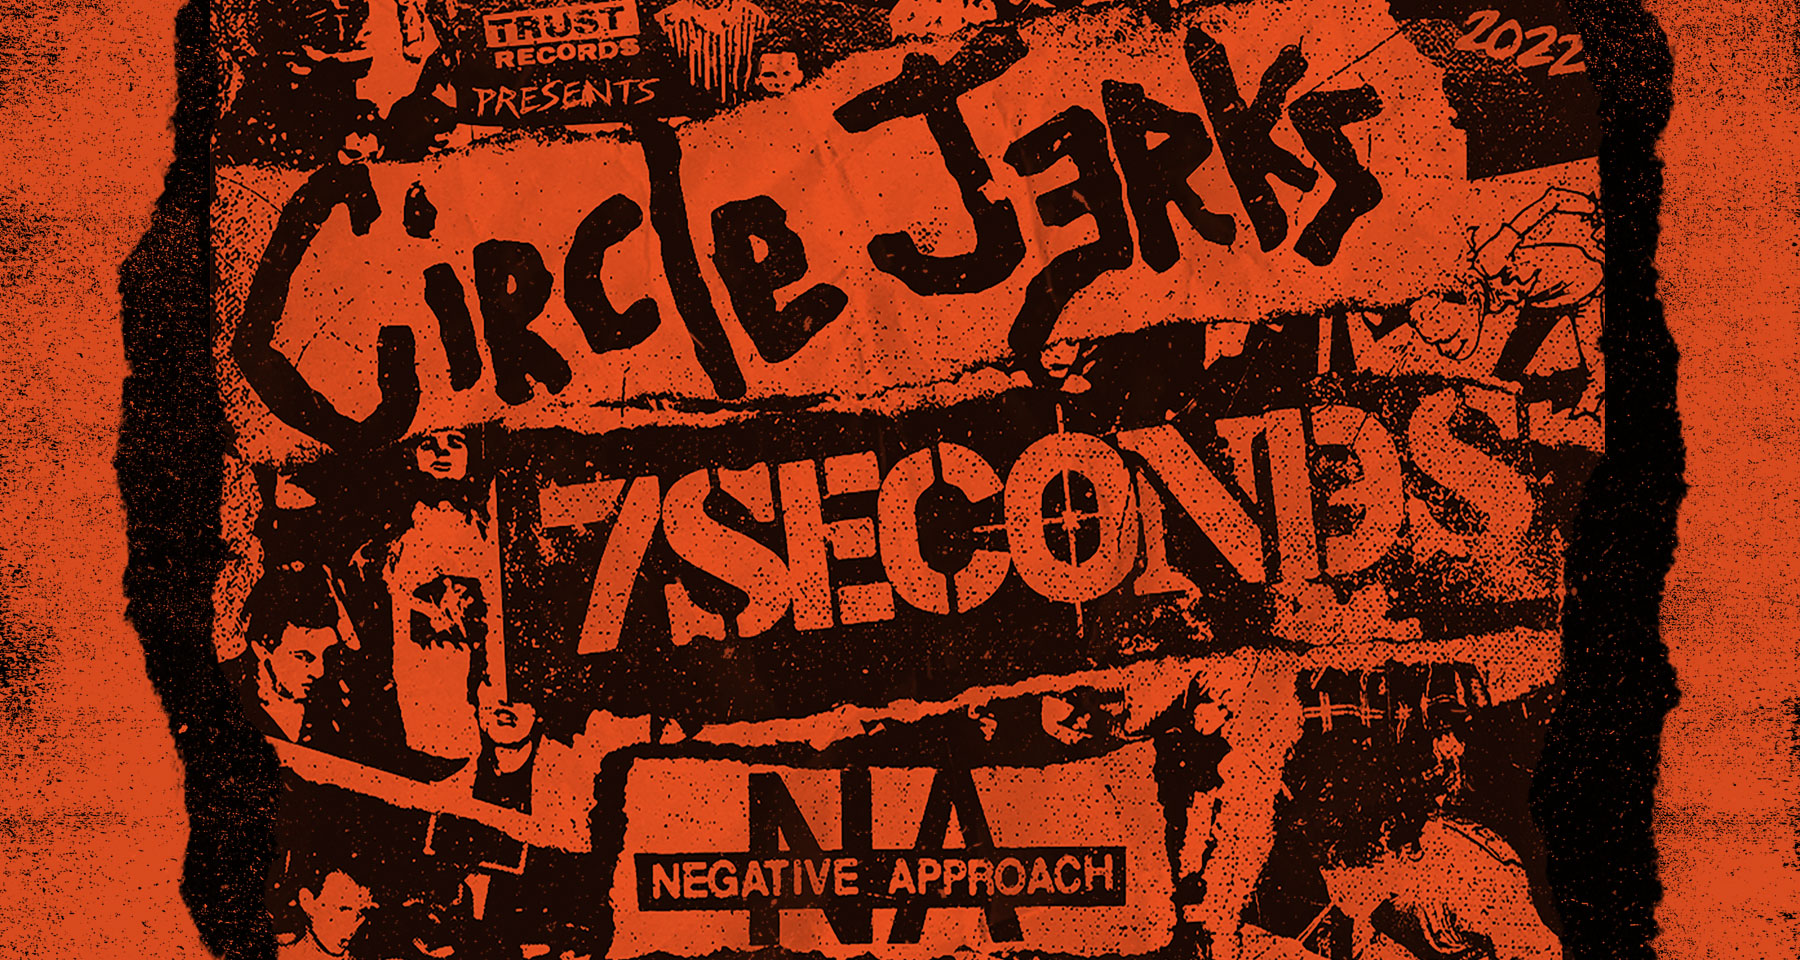 Trust Records presents Circle Jerks, 7Seconds and Negative Approach